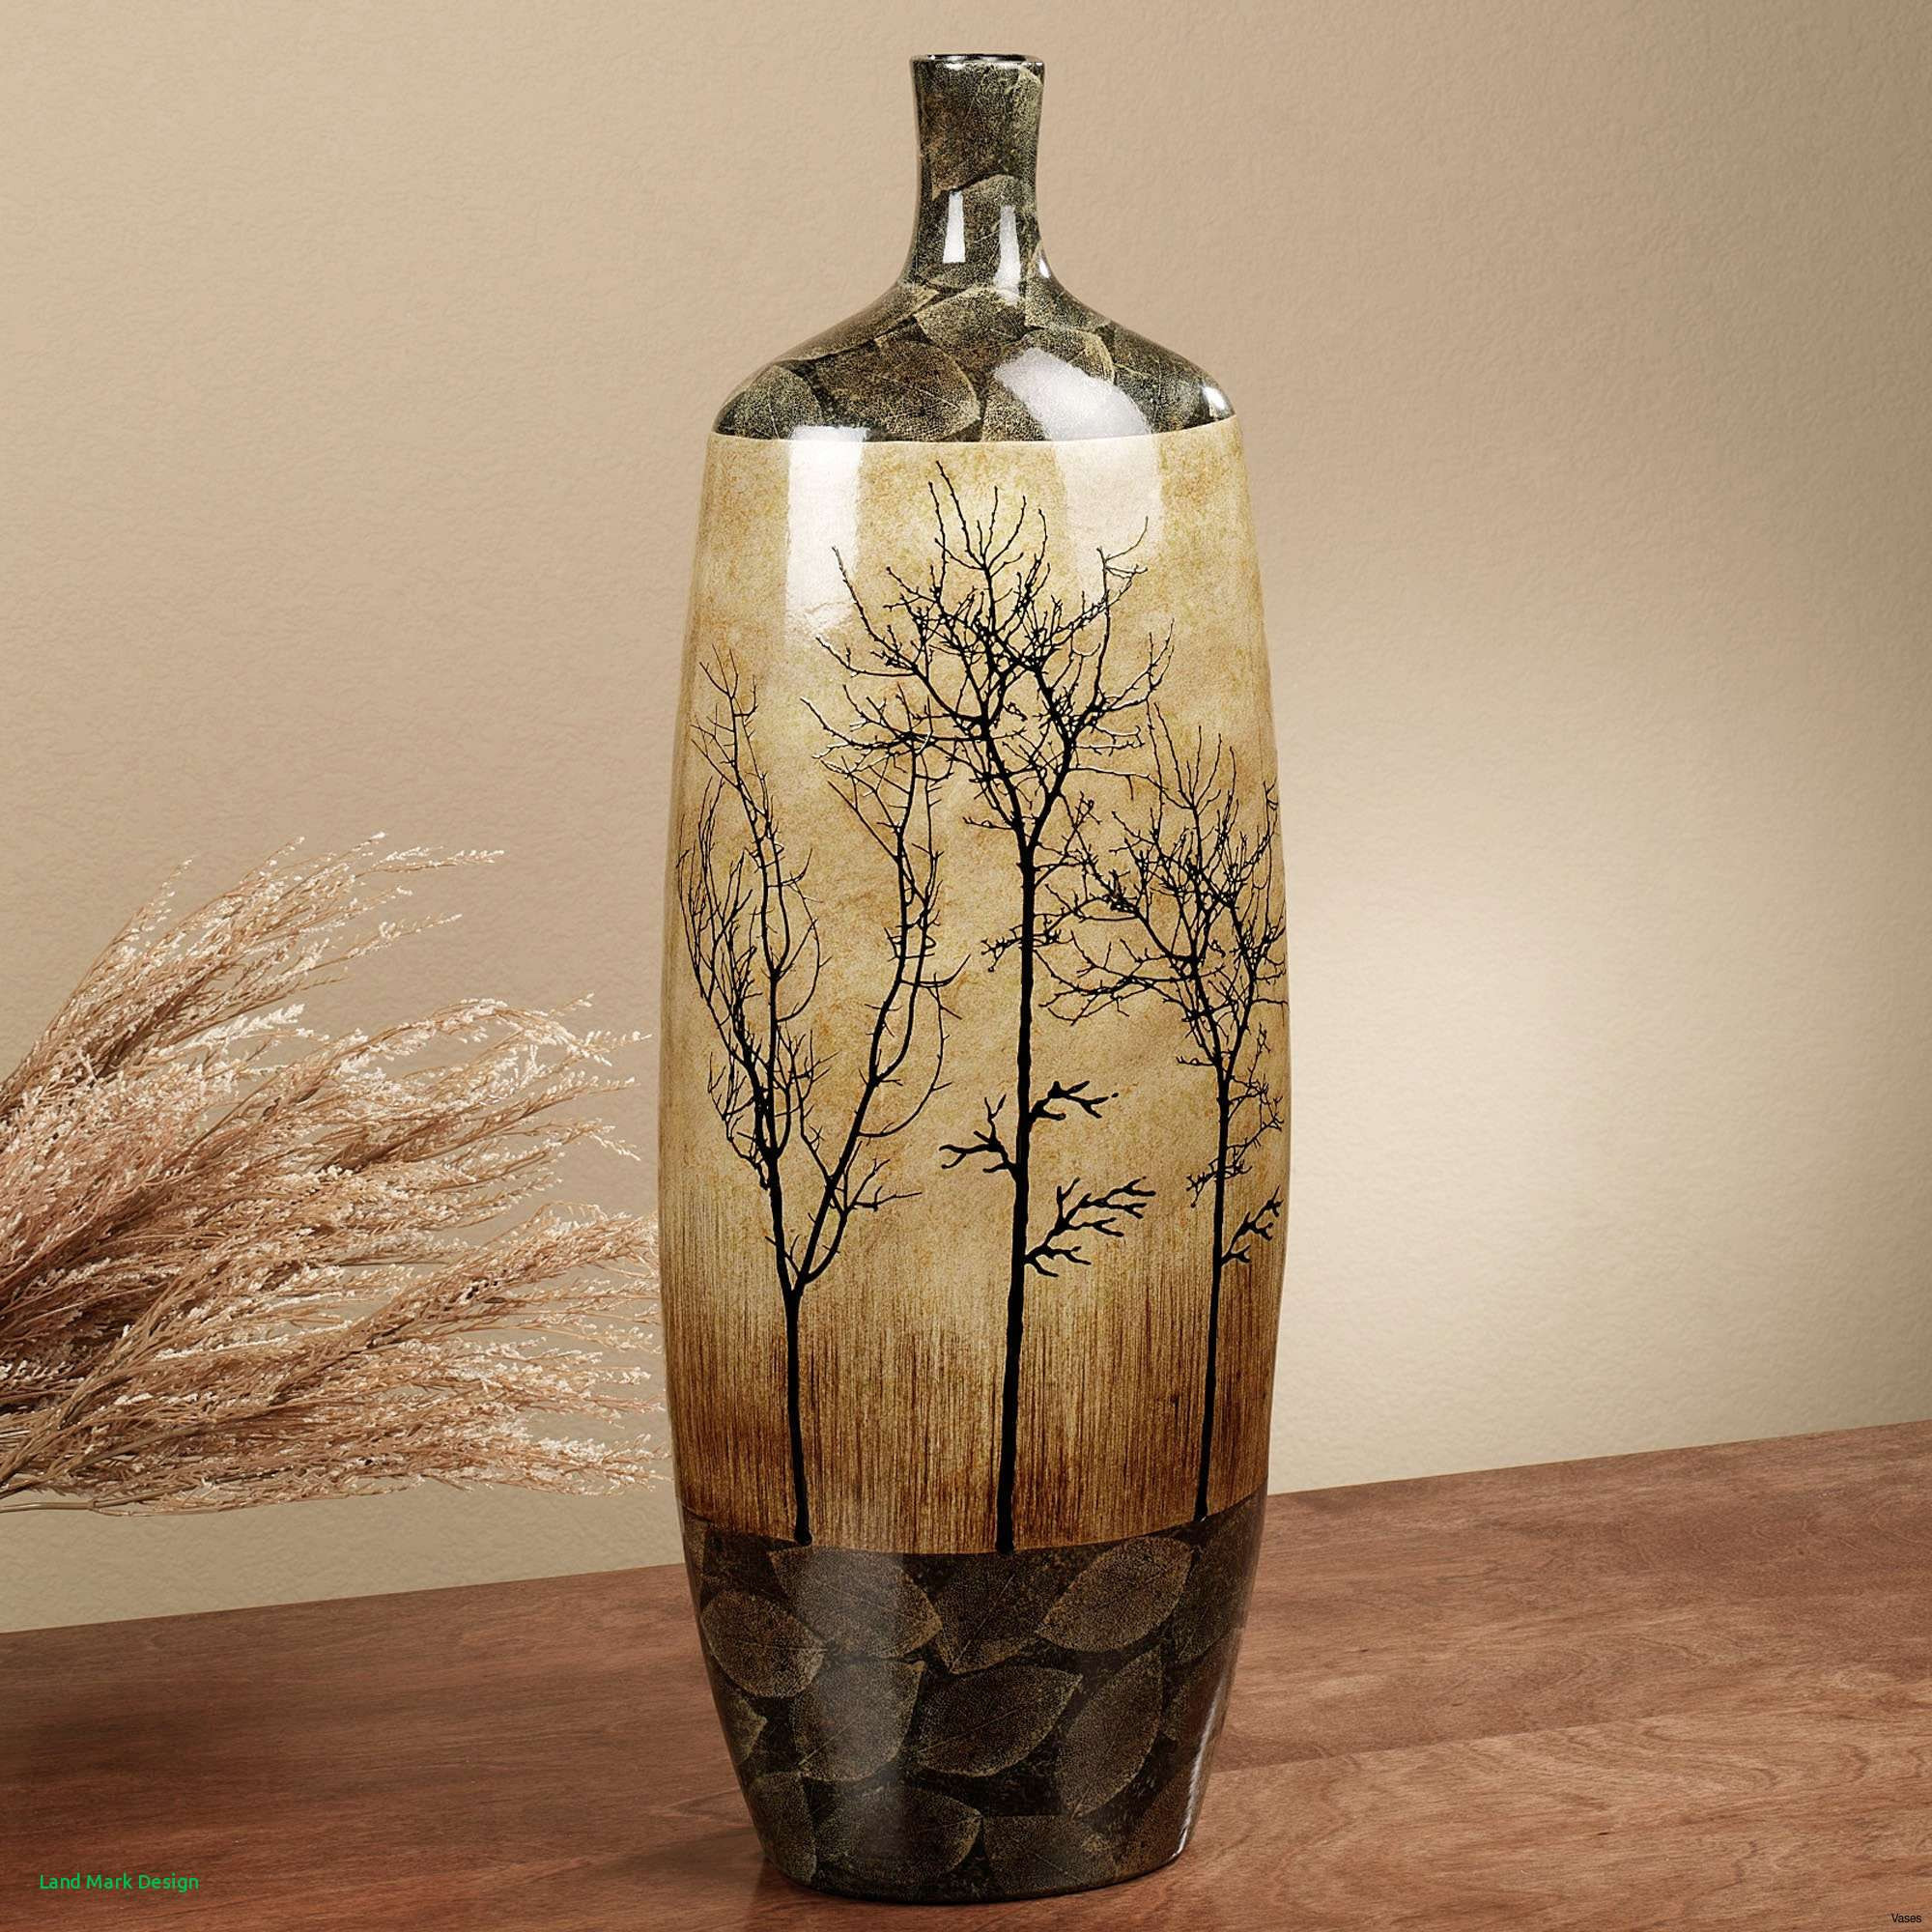 20 Nice asian Vases for Sale 2024 free download asian vases for sale of large glass vase photos vases flower floor vase with flowersi 0d with large glass vase images big vase of large glass vase photos vases flower floor vase with